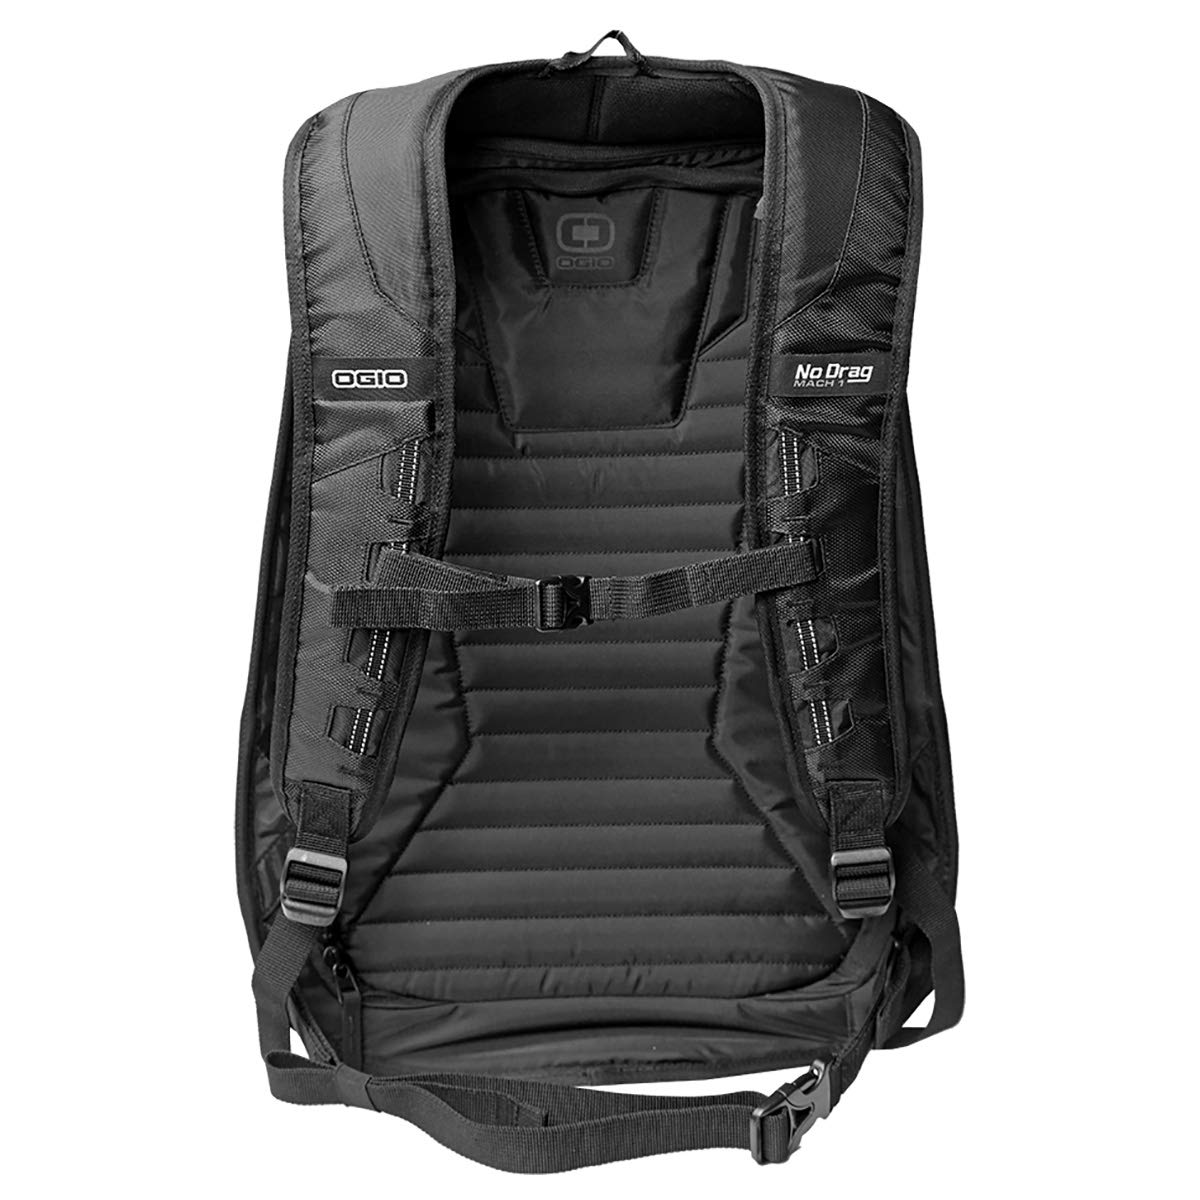 OGIO 123008.36 No Drag Mach 1 Motorcycle Backpack - Stealth Black, 19&quot; H x 12.5&quot; W x 6.5&quot; D